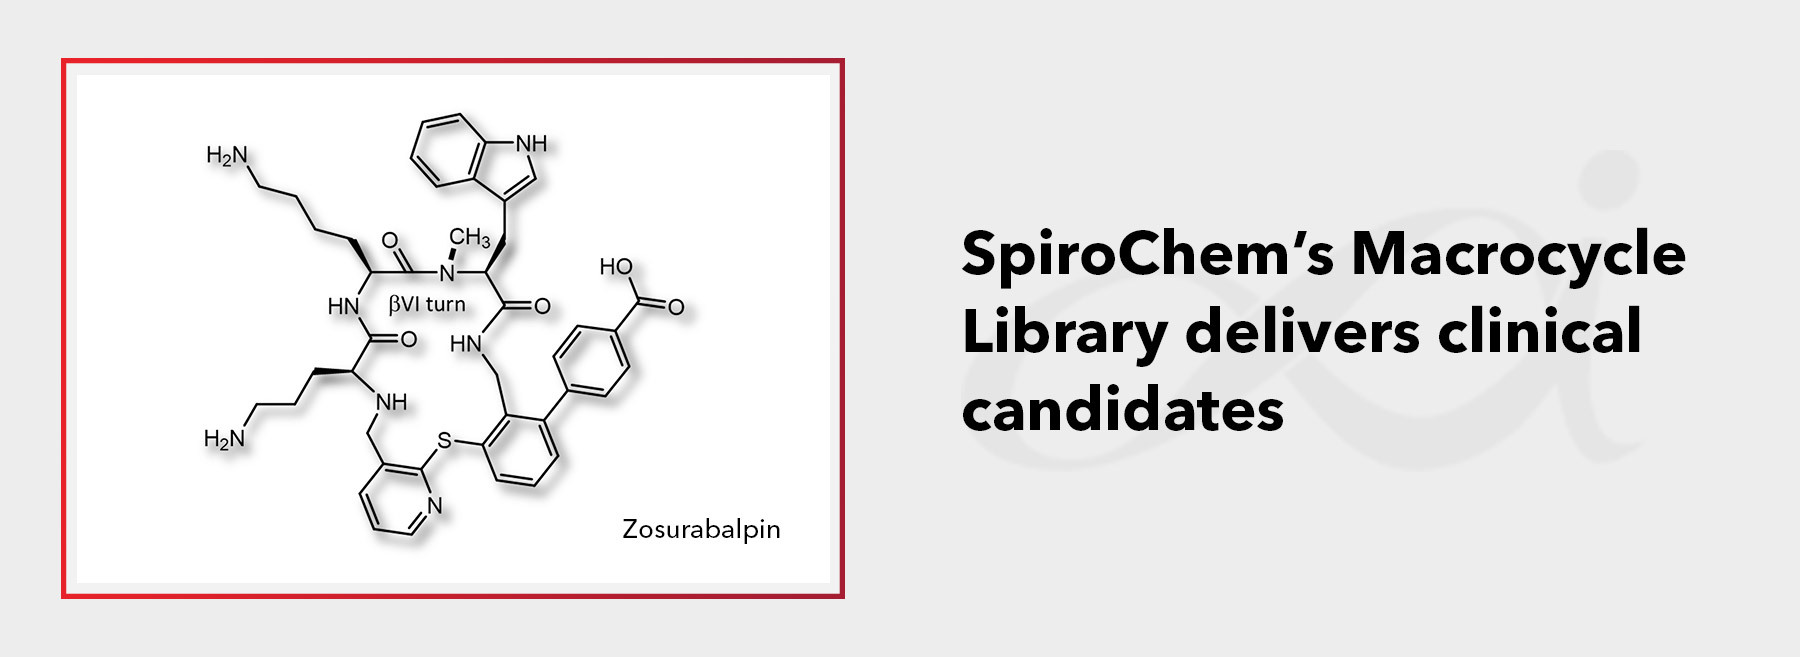 SpiroChem’s Macrocycle Library delivers clinical candidates